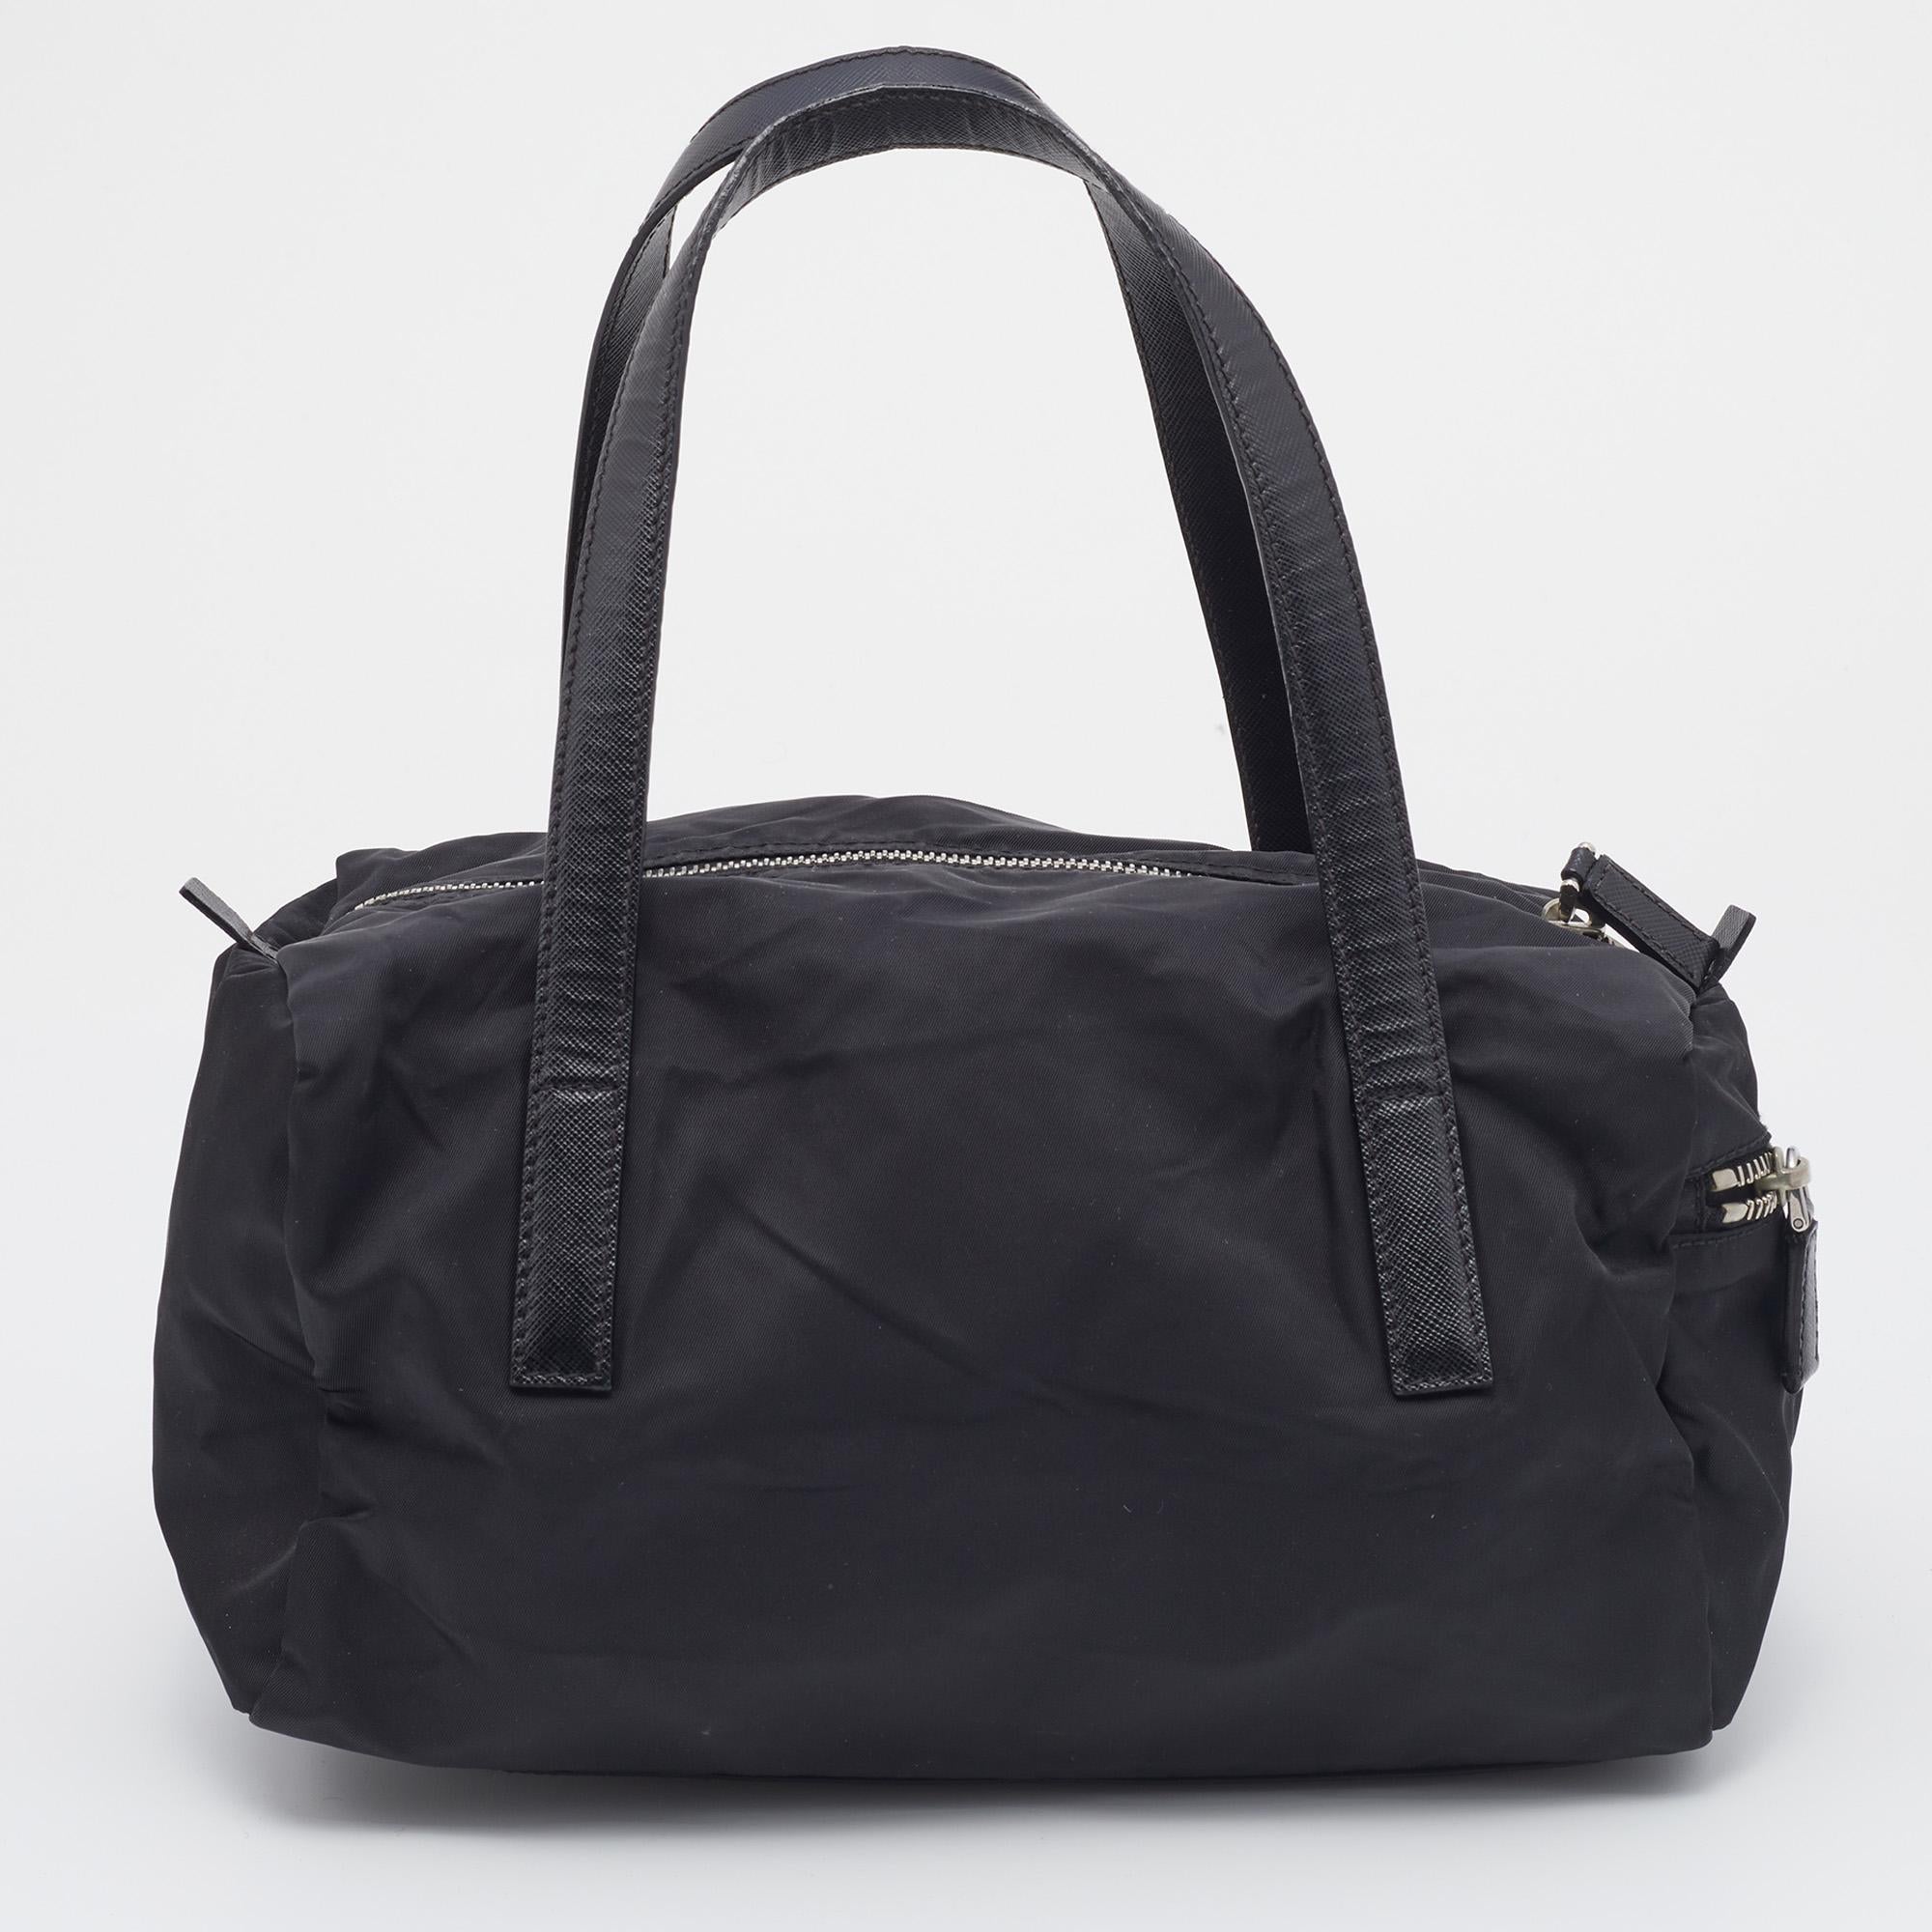 This Prada bag will uplift your style quotient and take it a notch higher. A fine blend of cool style and functionality, this black bag is crafted from a fine blend of materials and has the brand logo on the front along with dual top handles. This